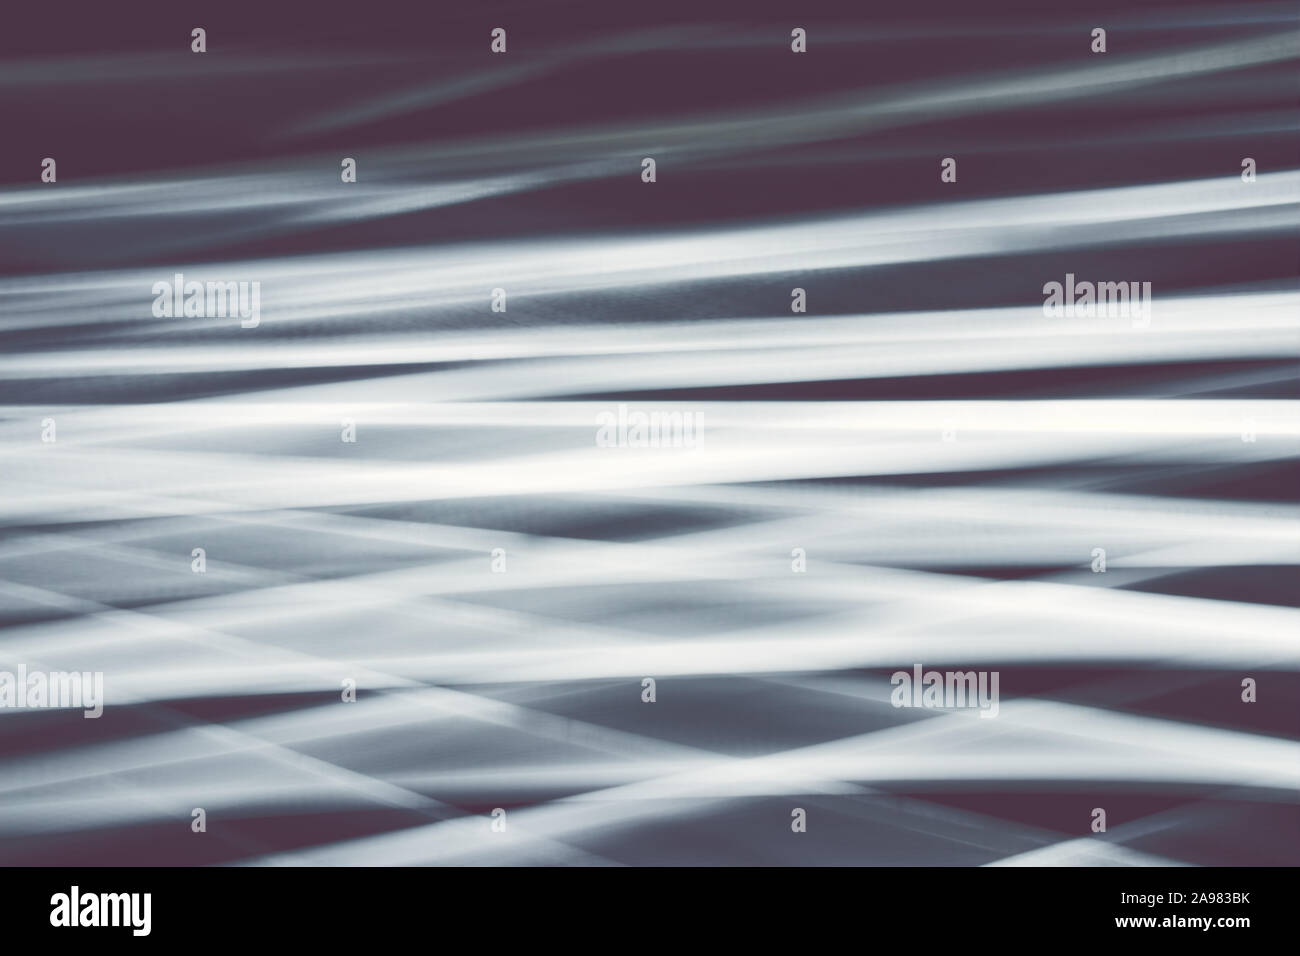 Motion blurred lights, abstract defocused background. Stock Photo